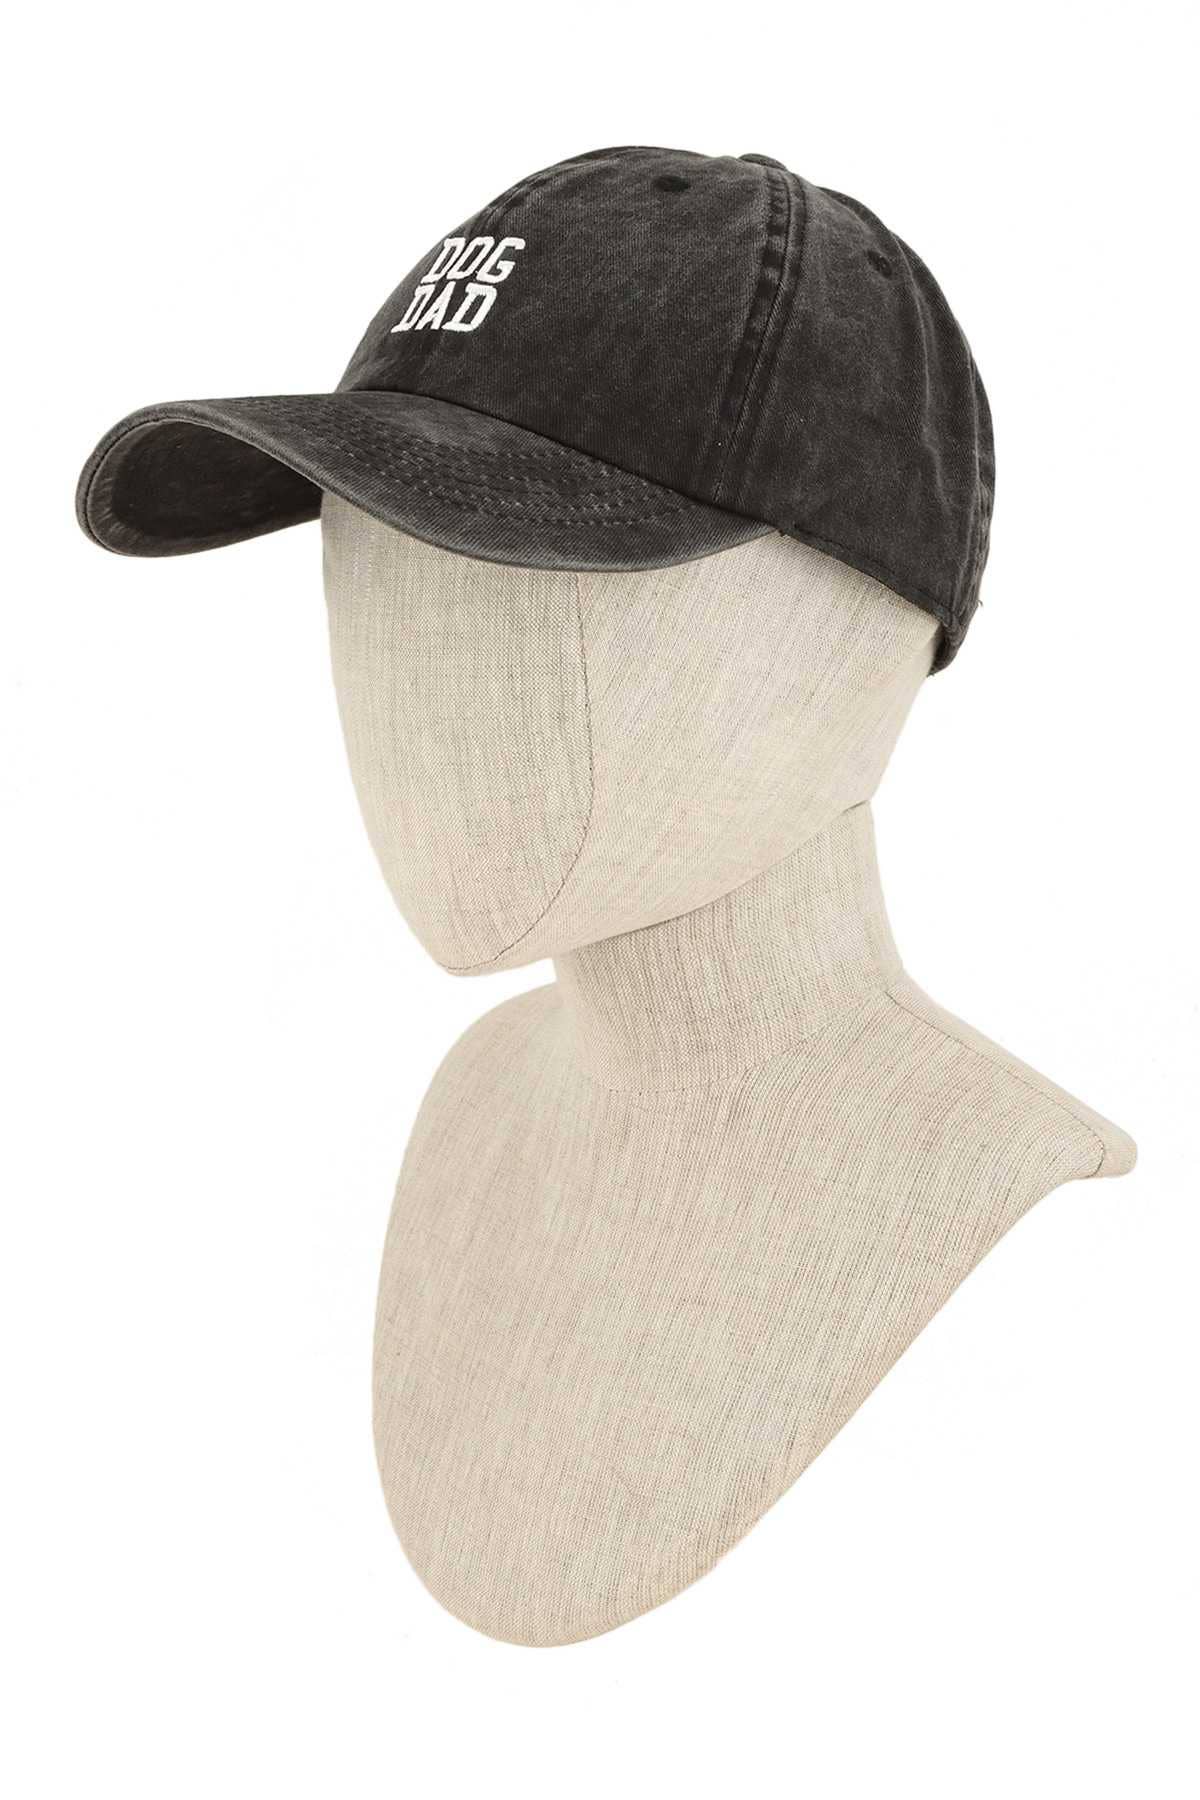 Dog Dad Embroidery Pigment Washed Cap